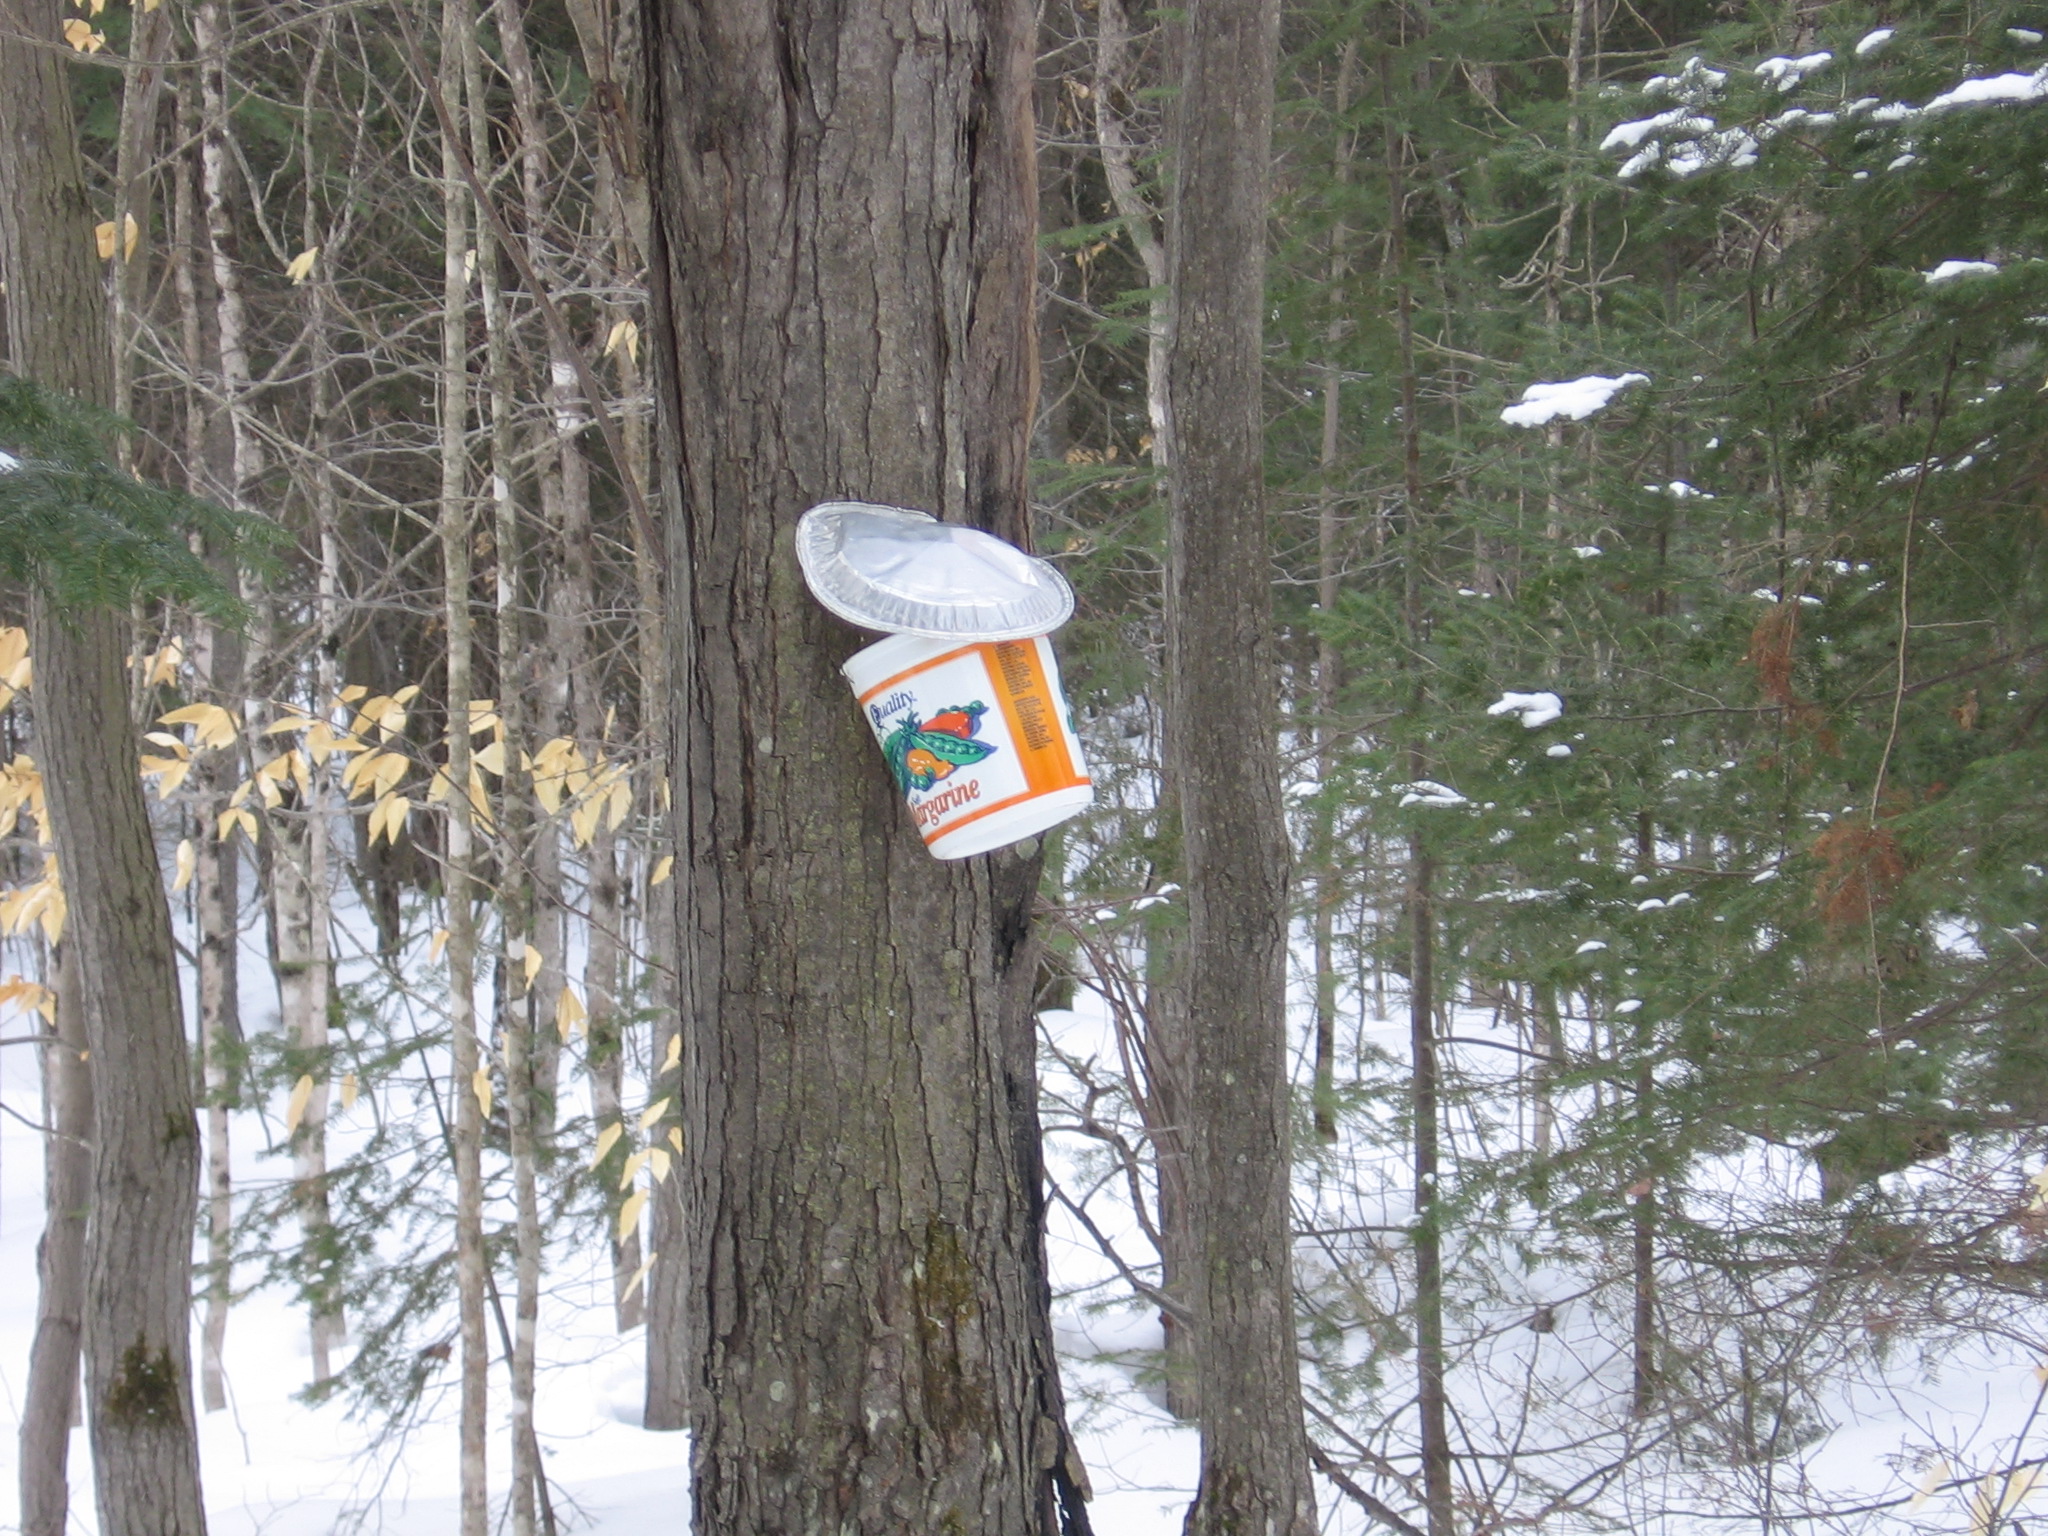 Large cast iron pot being used to reduce sugar maple sap to maple